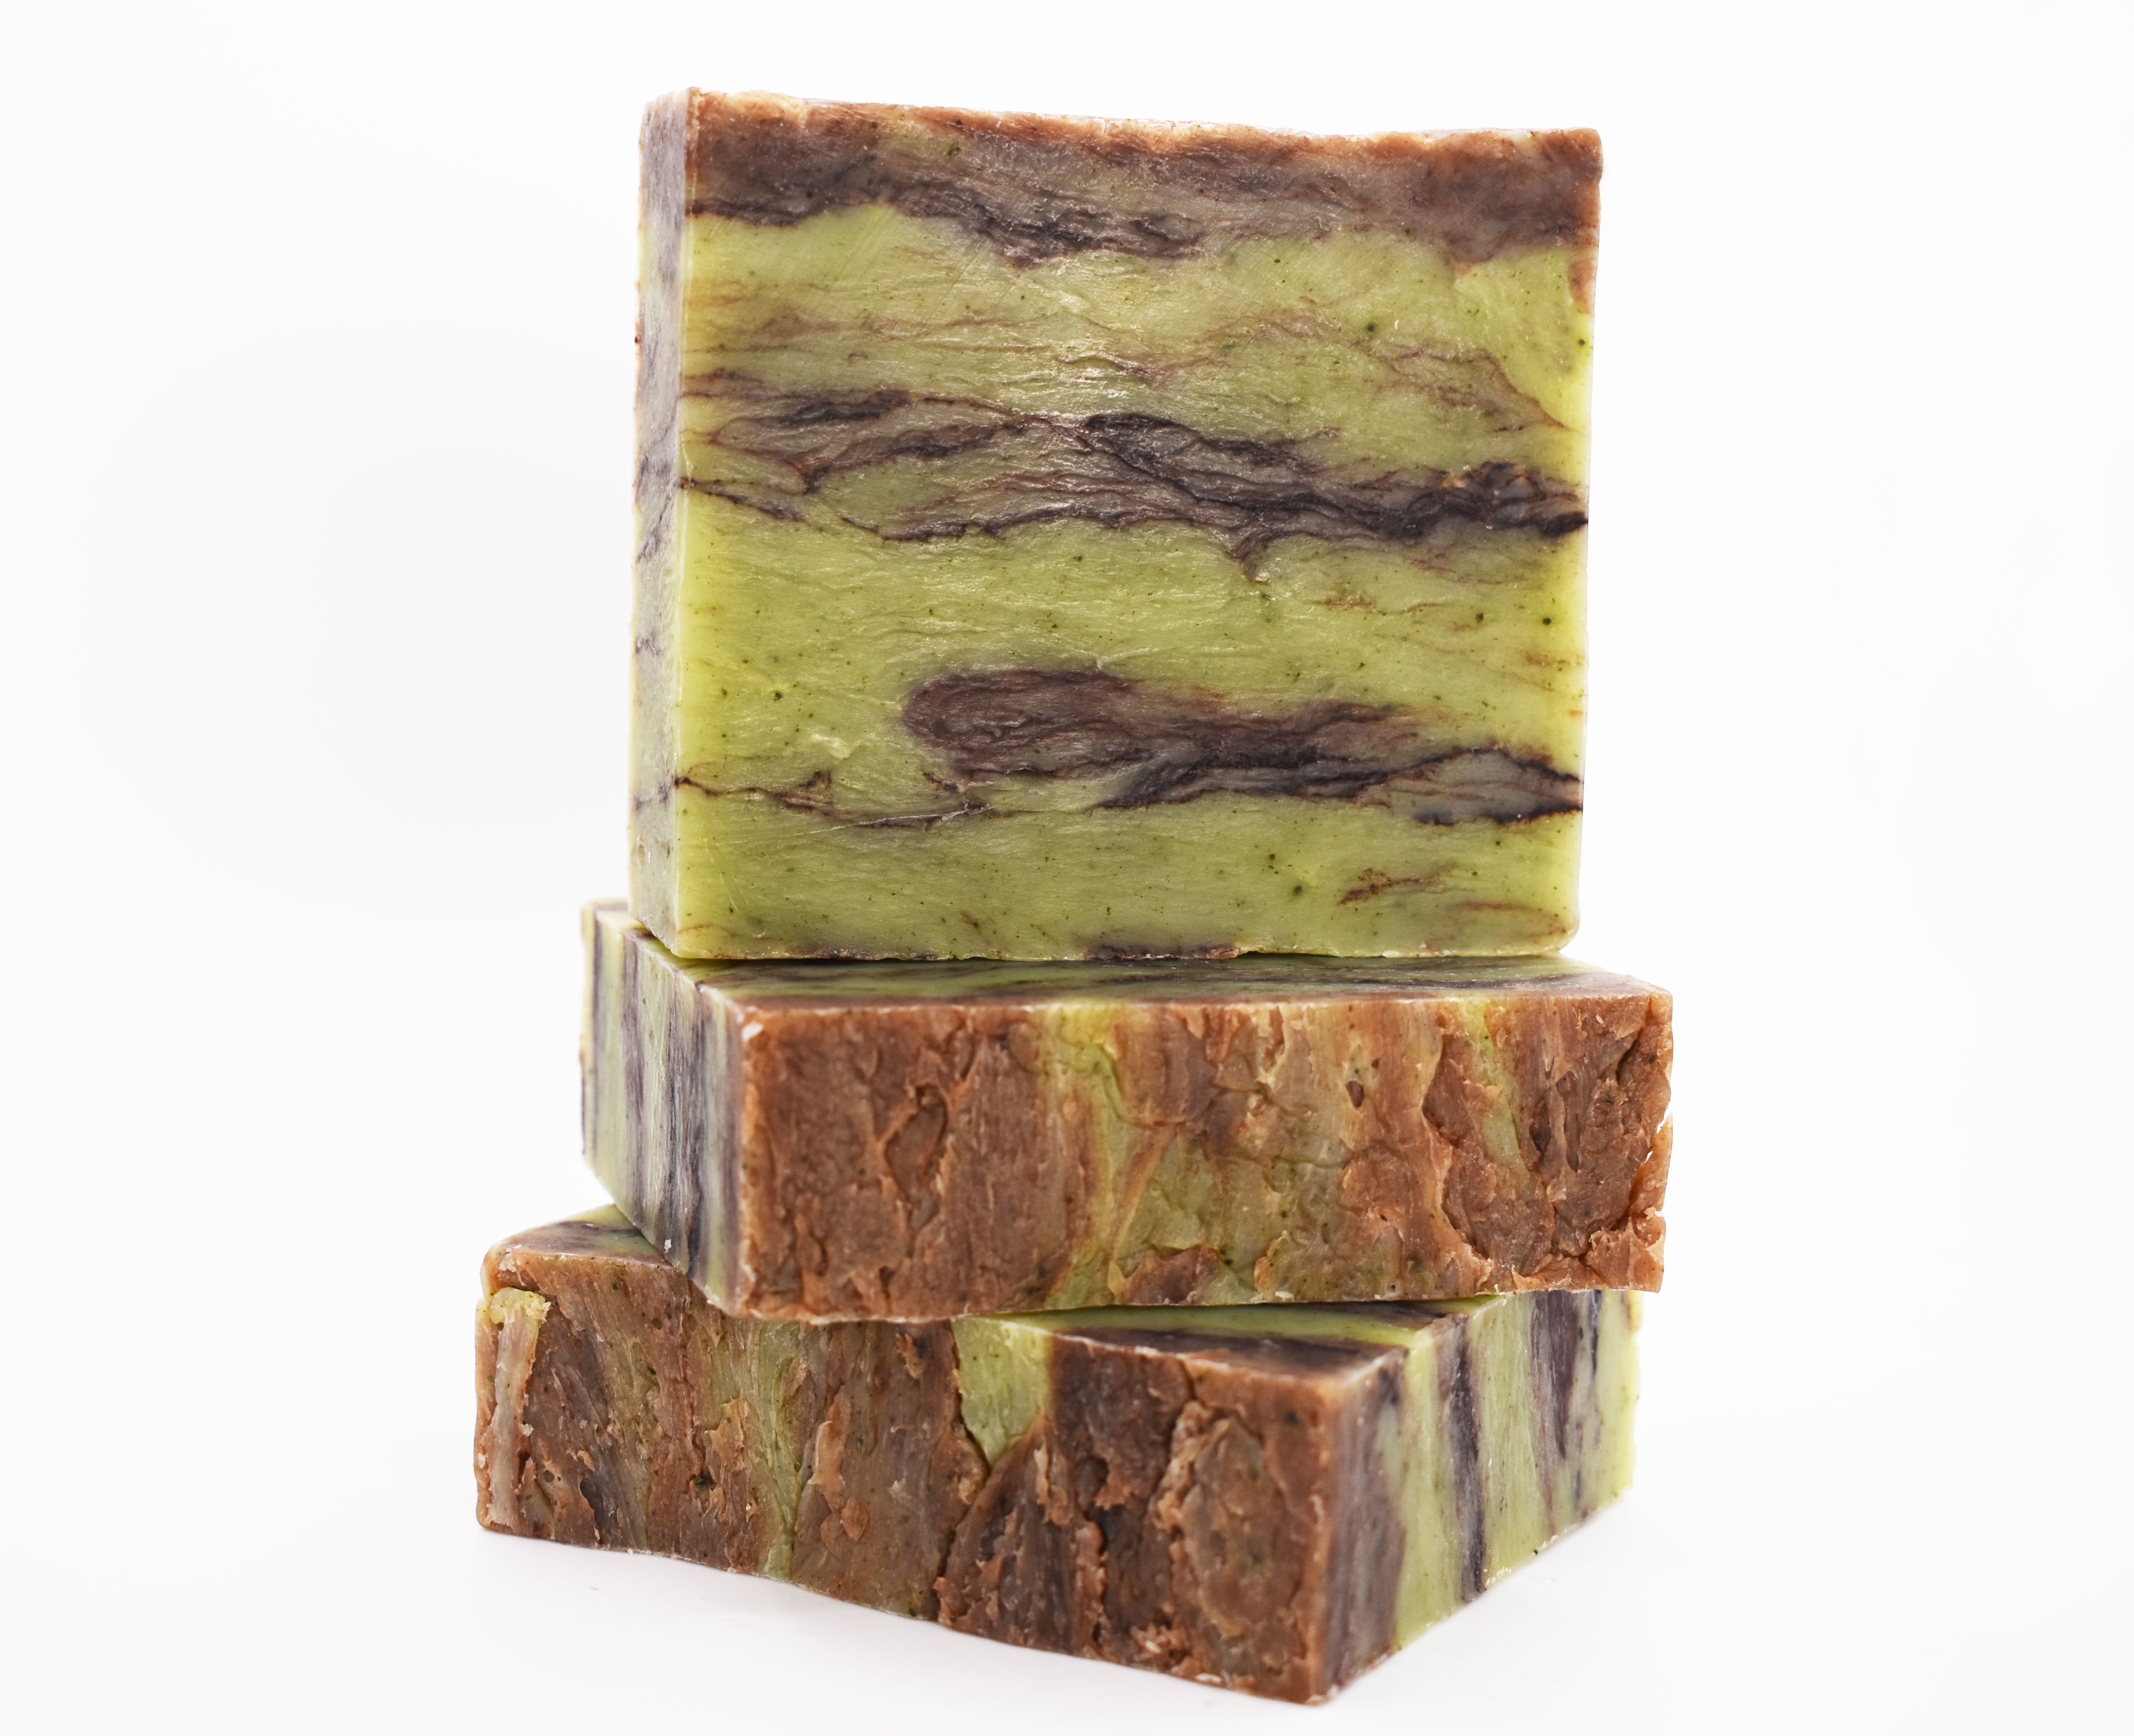 Frankincense and Myrrh Soap Bar 6 oz - Museum of the Bible Store